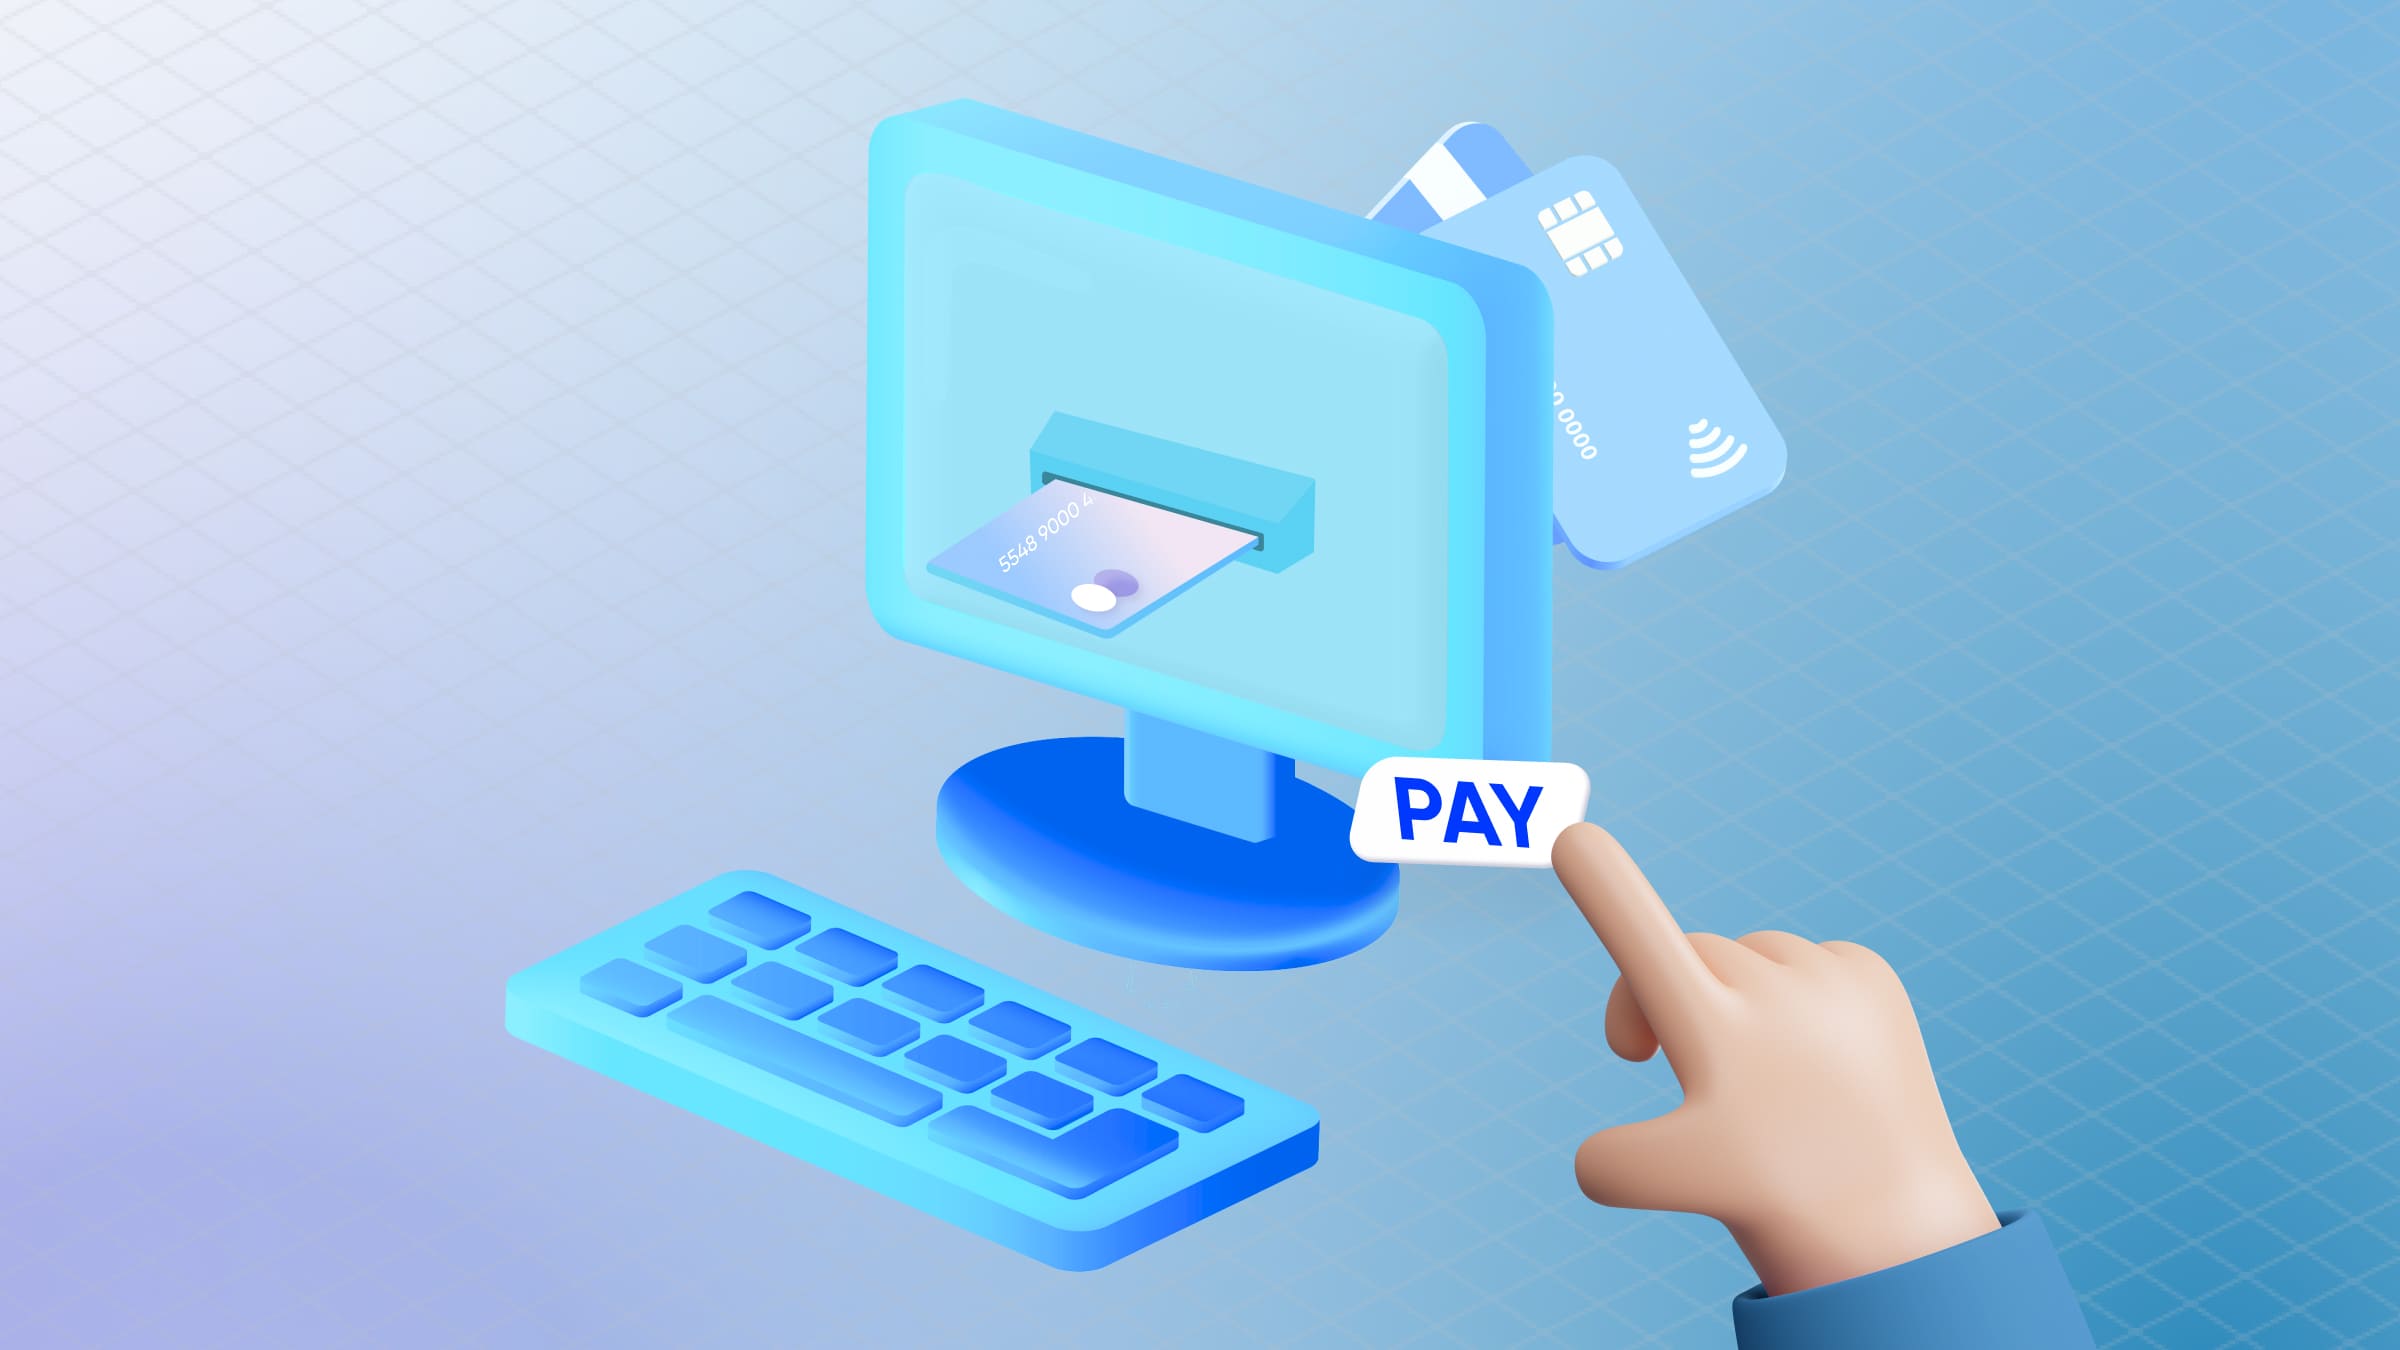 Payment aggregators allow you to connect multiple payment methods, but charge high fees.